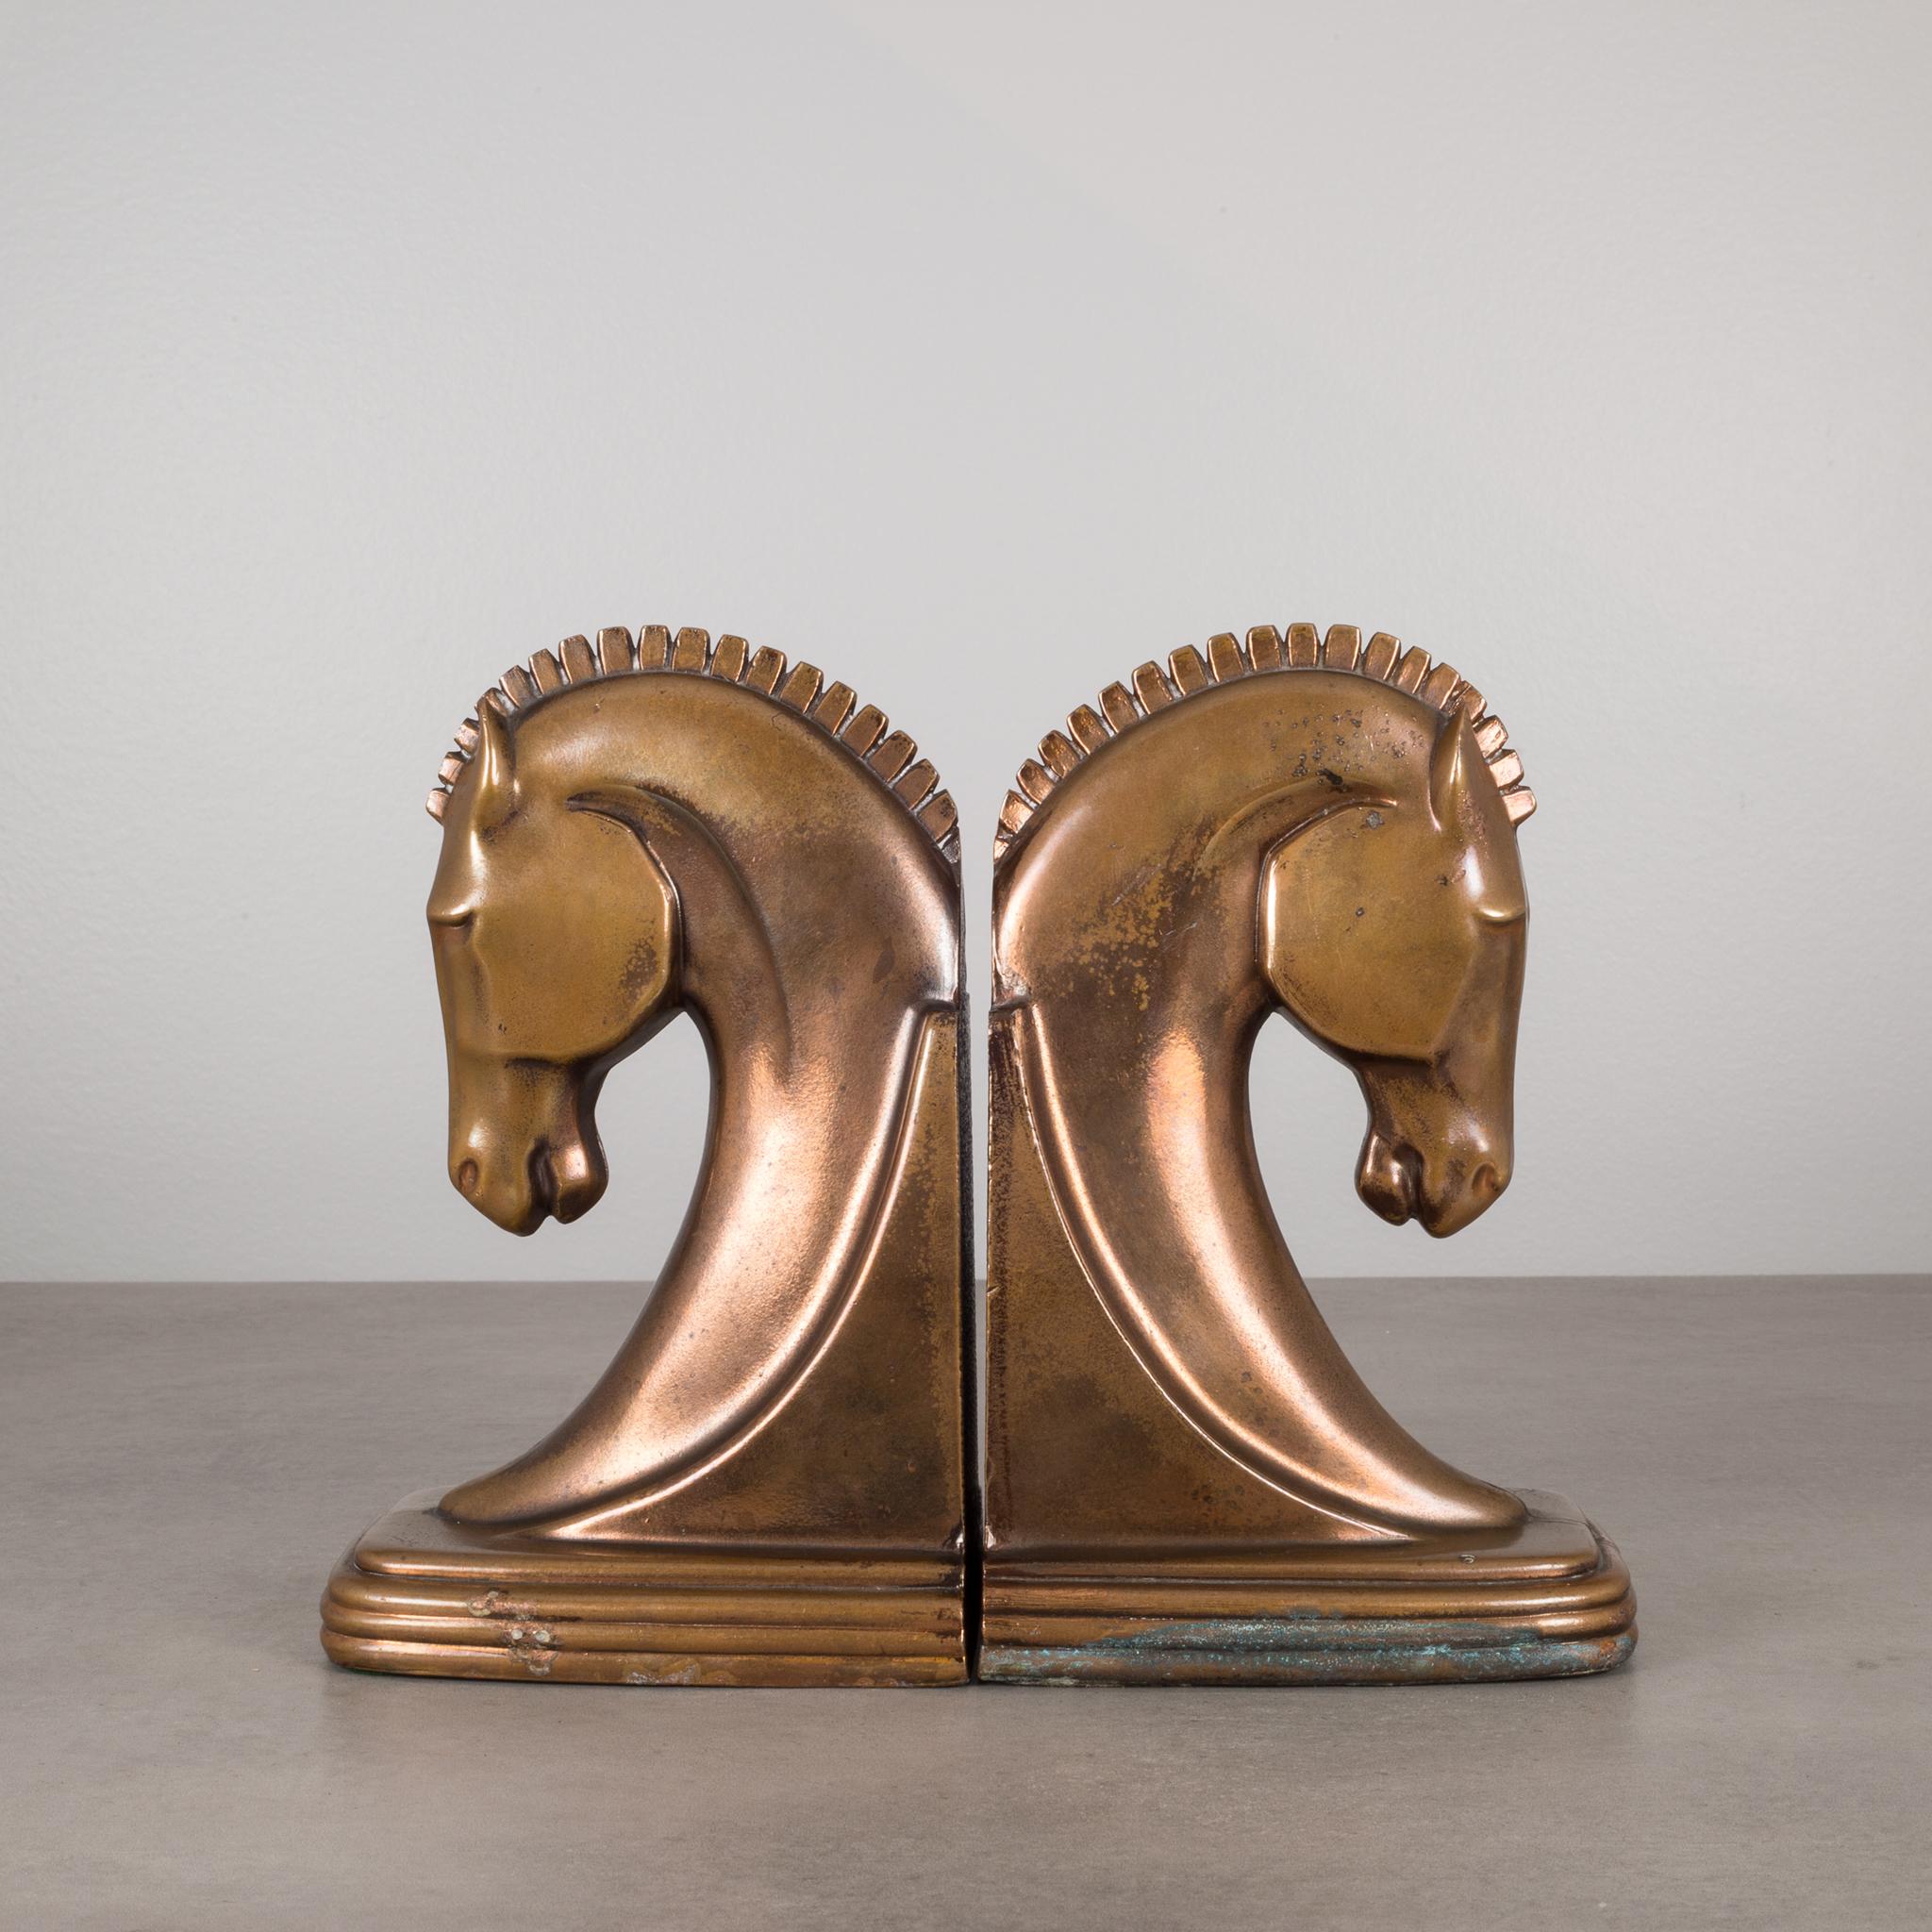 20th Century Art Deco Machine Age Copper Plated Trojan Horse Bookends by Dodge c. 1930